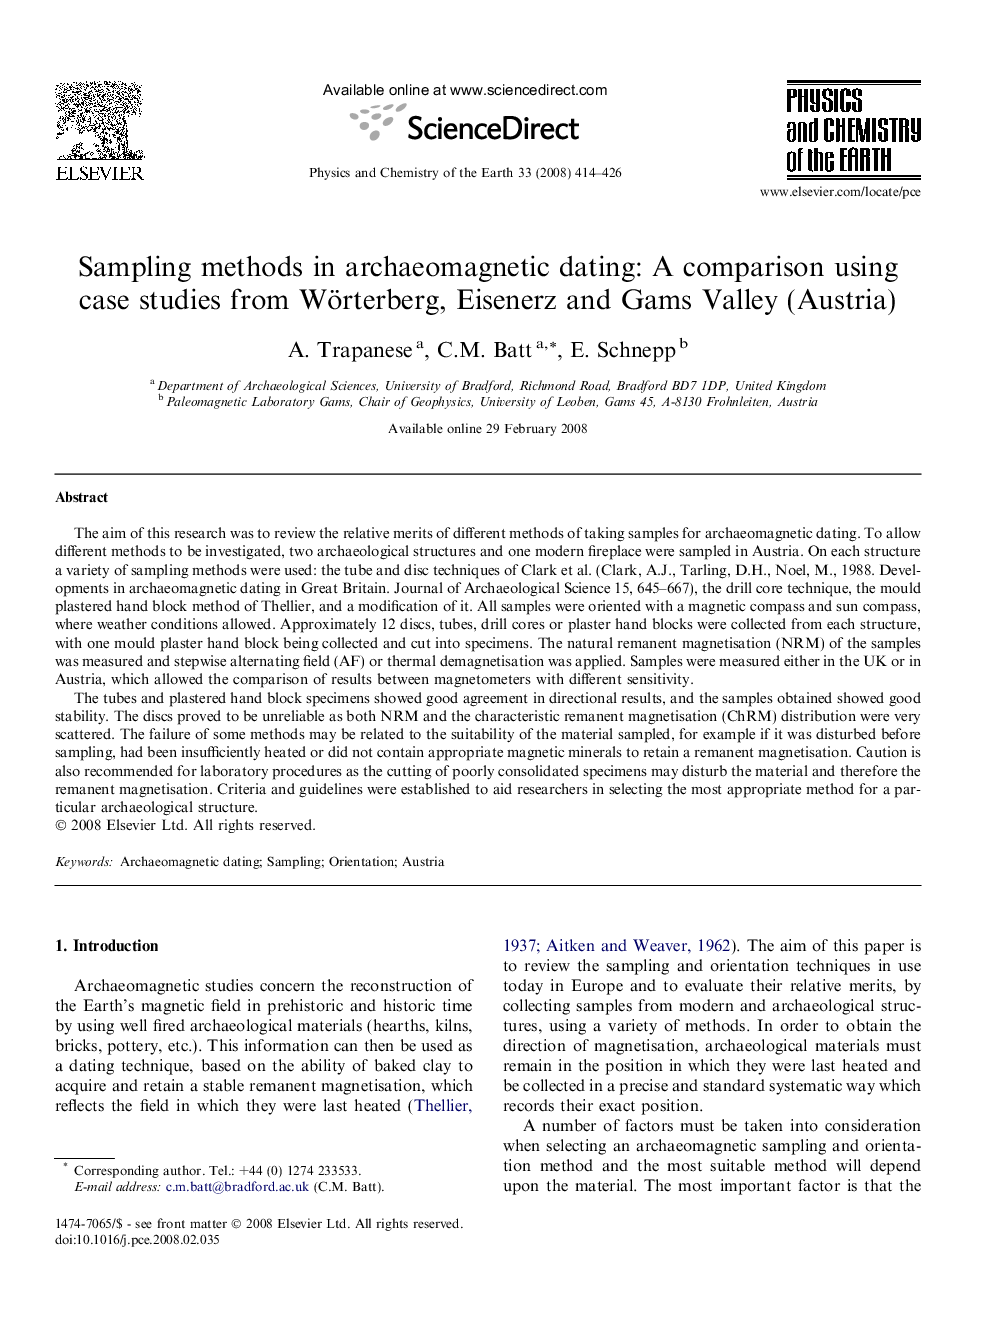 Sampling methods in archaeomagnetic dating: A comparison using case studies from Wörterberg, Eisenerz and Gams Valley (Austria)